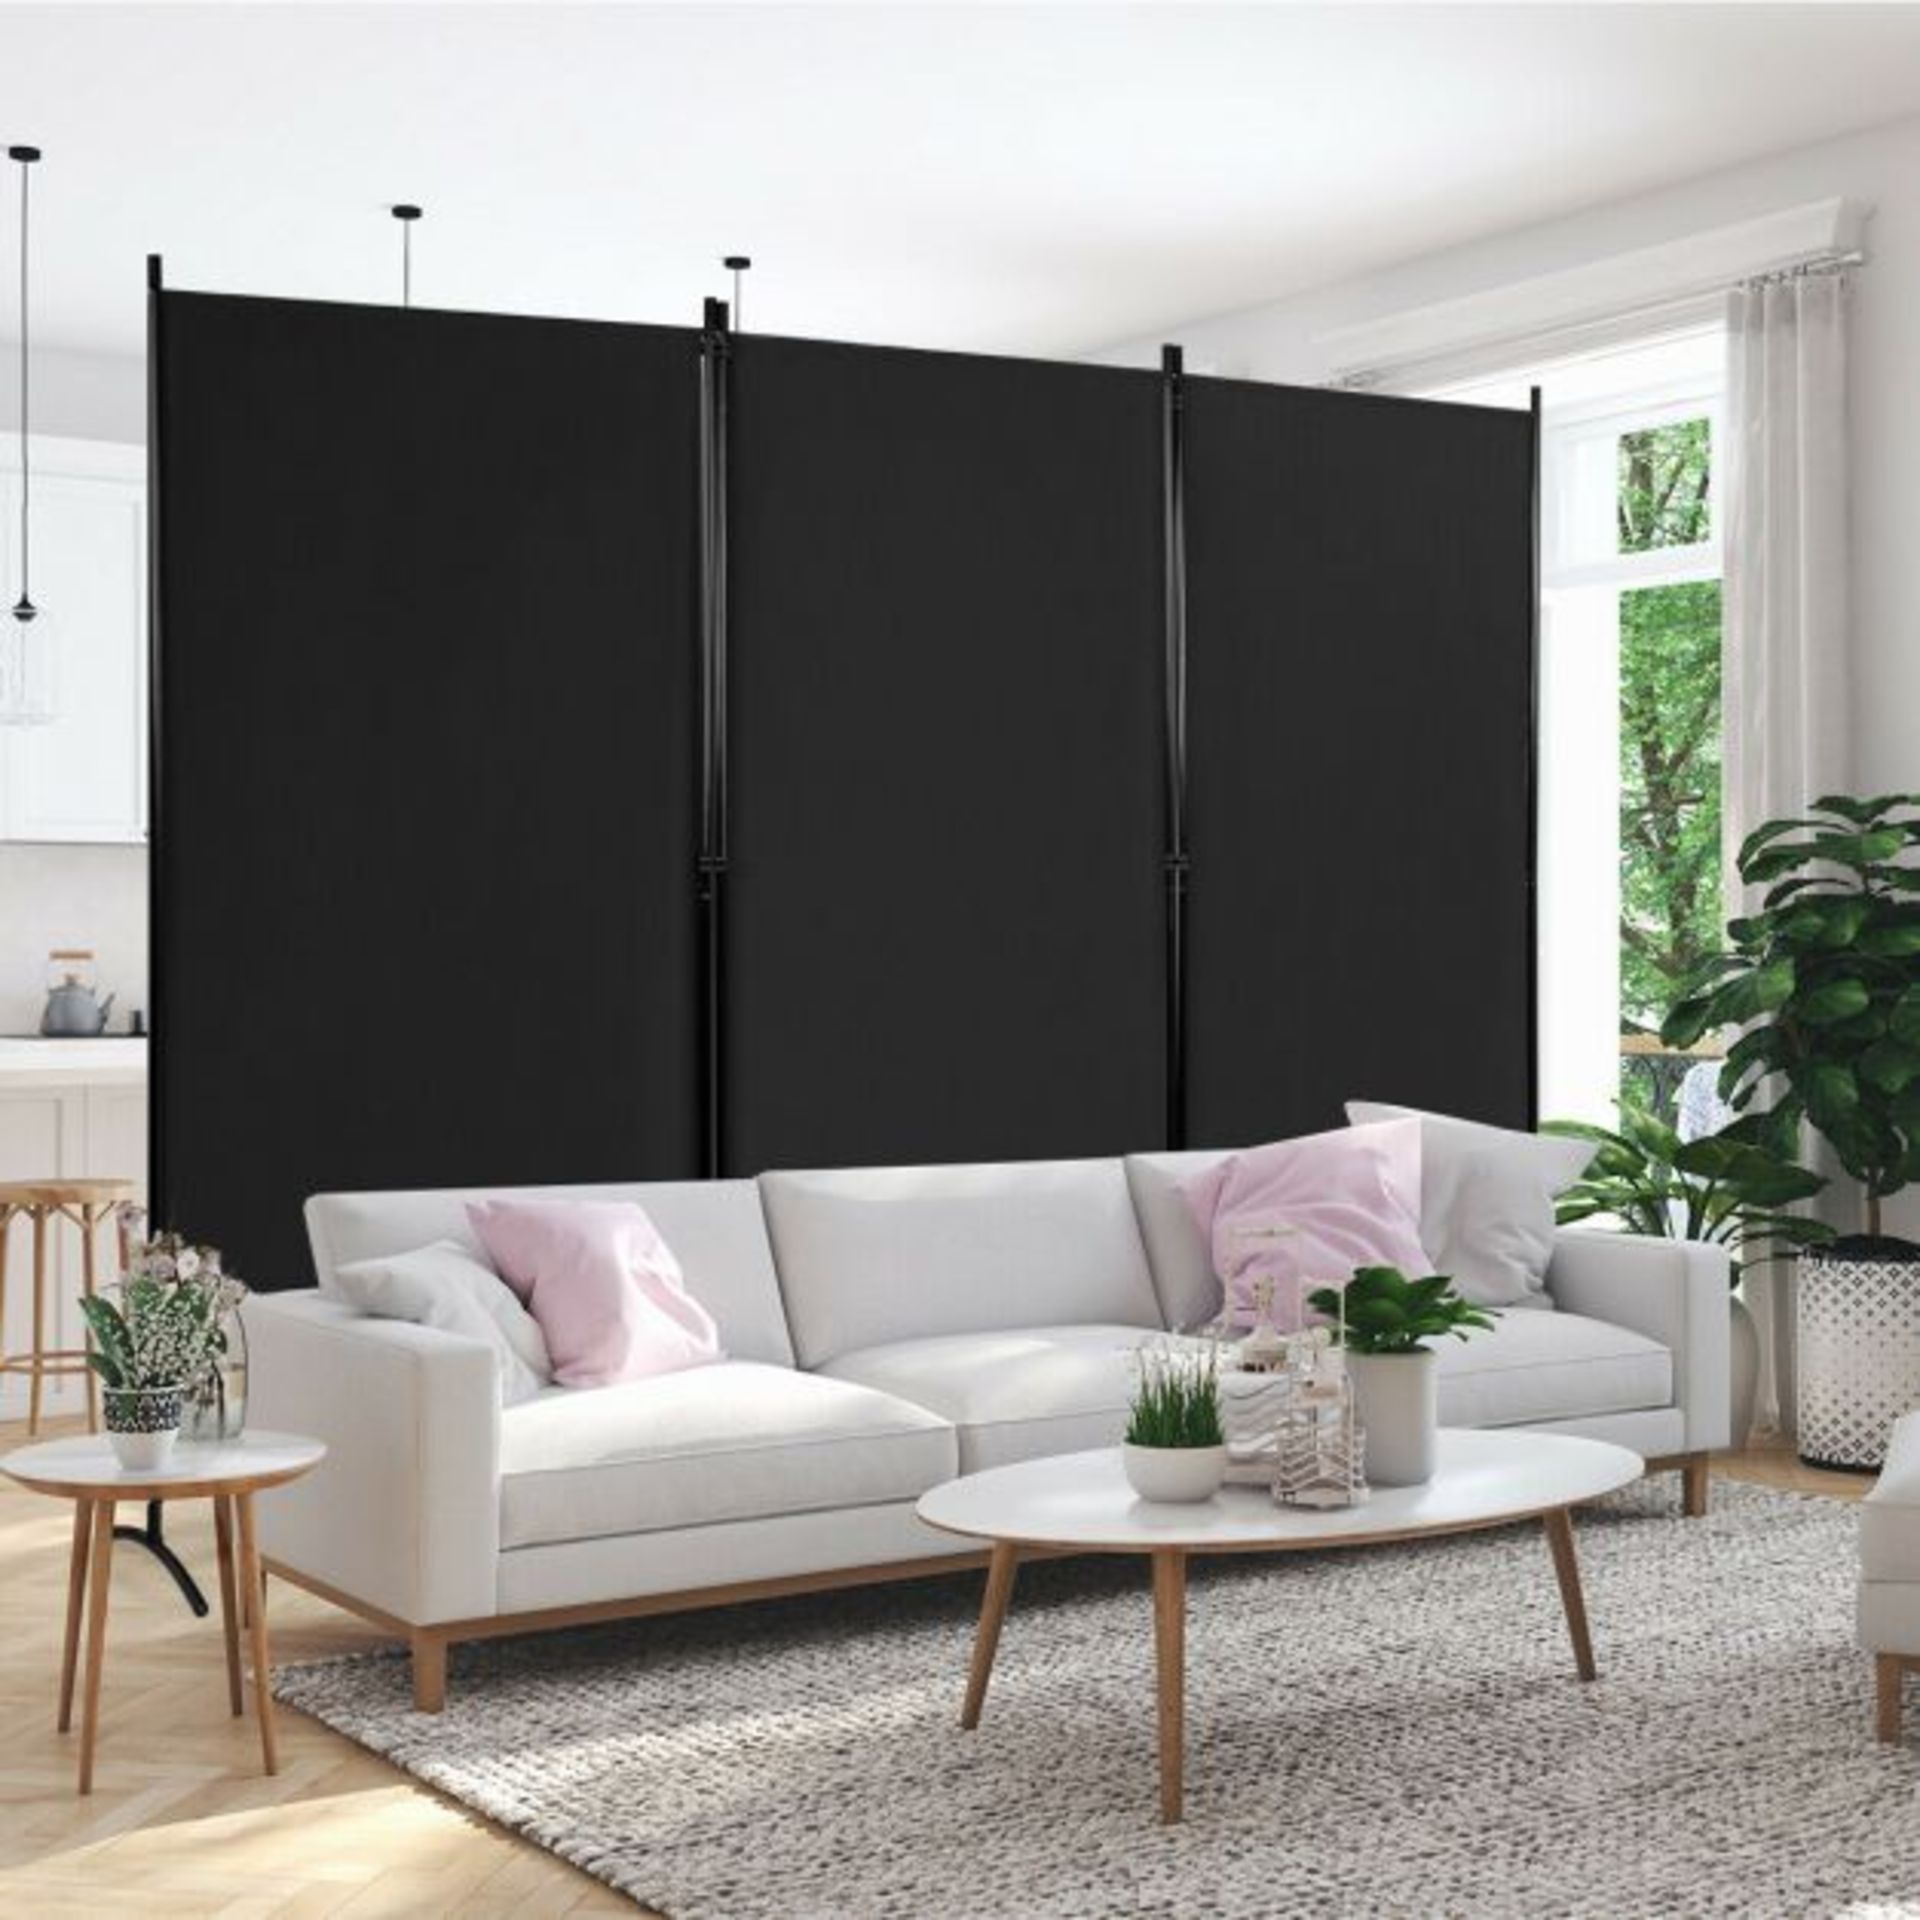 3-Panel Freestanding Wood Room Divider with Durable Hinges Steel Base. - ER53. Do you long to have a